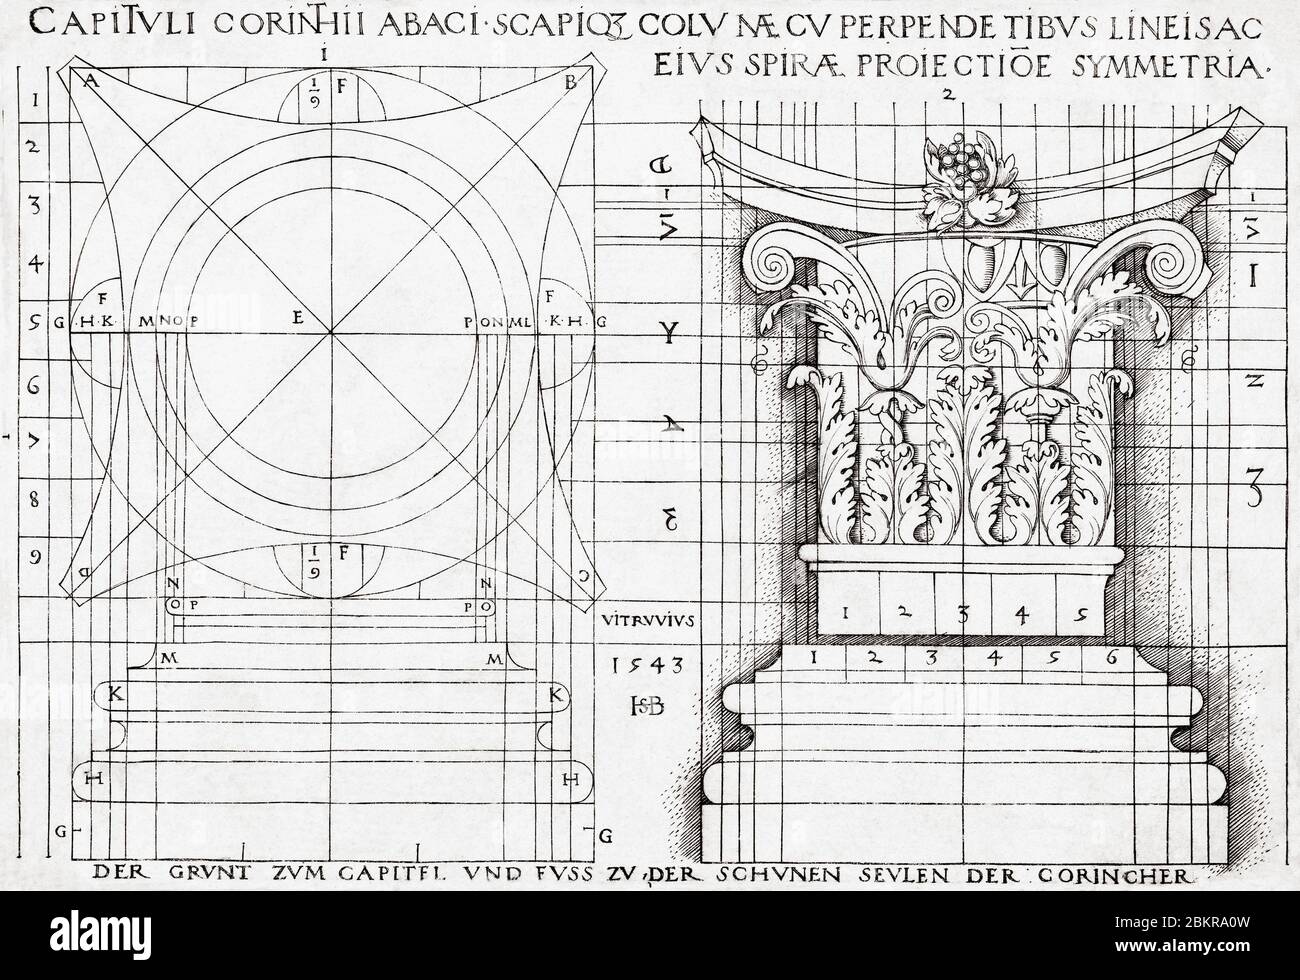 Cross section of a Corinthian capital and proportional drawing of same.  Engraving by Hans Sebald Beham after a copy of a work by Vitruvius. Stock Photo